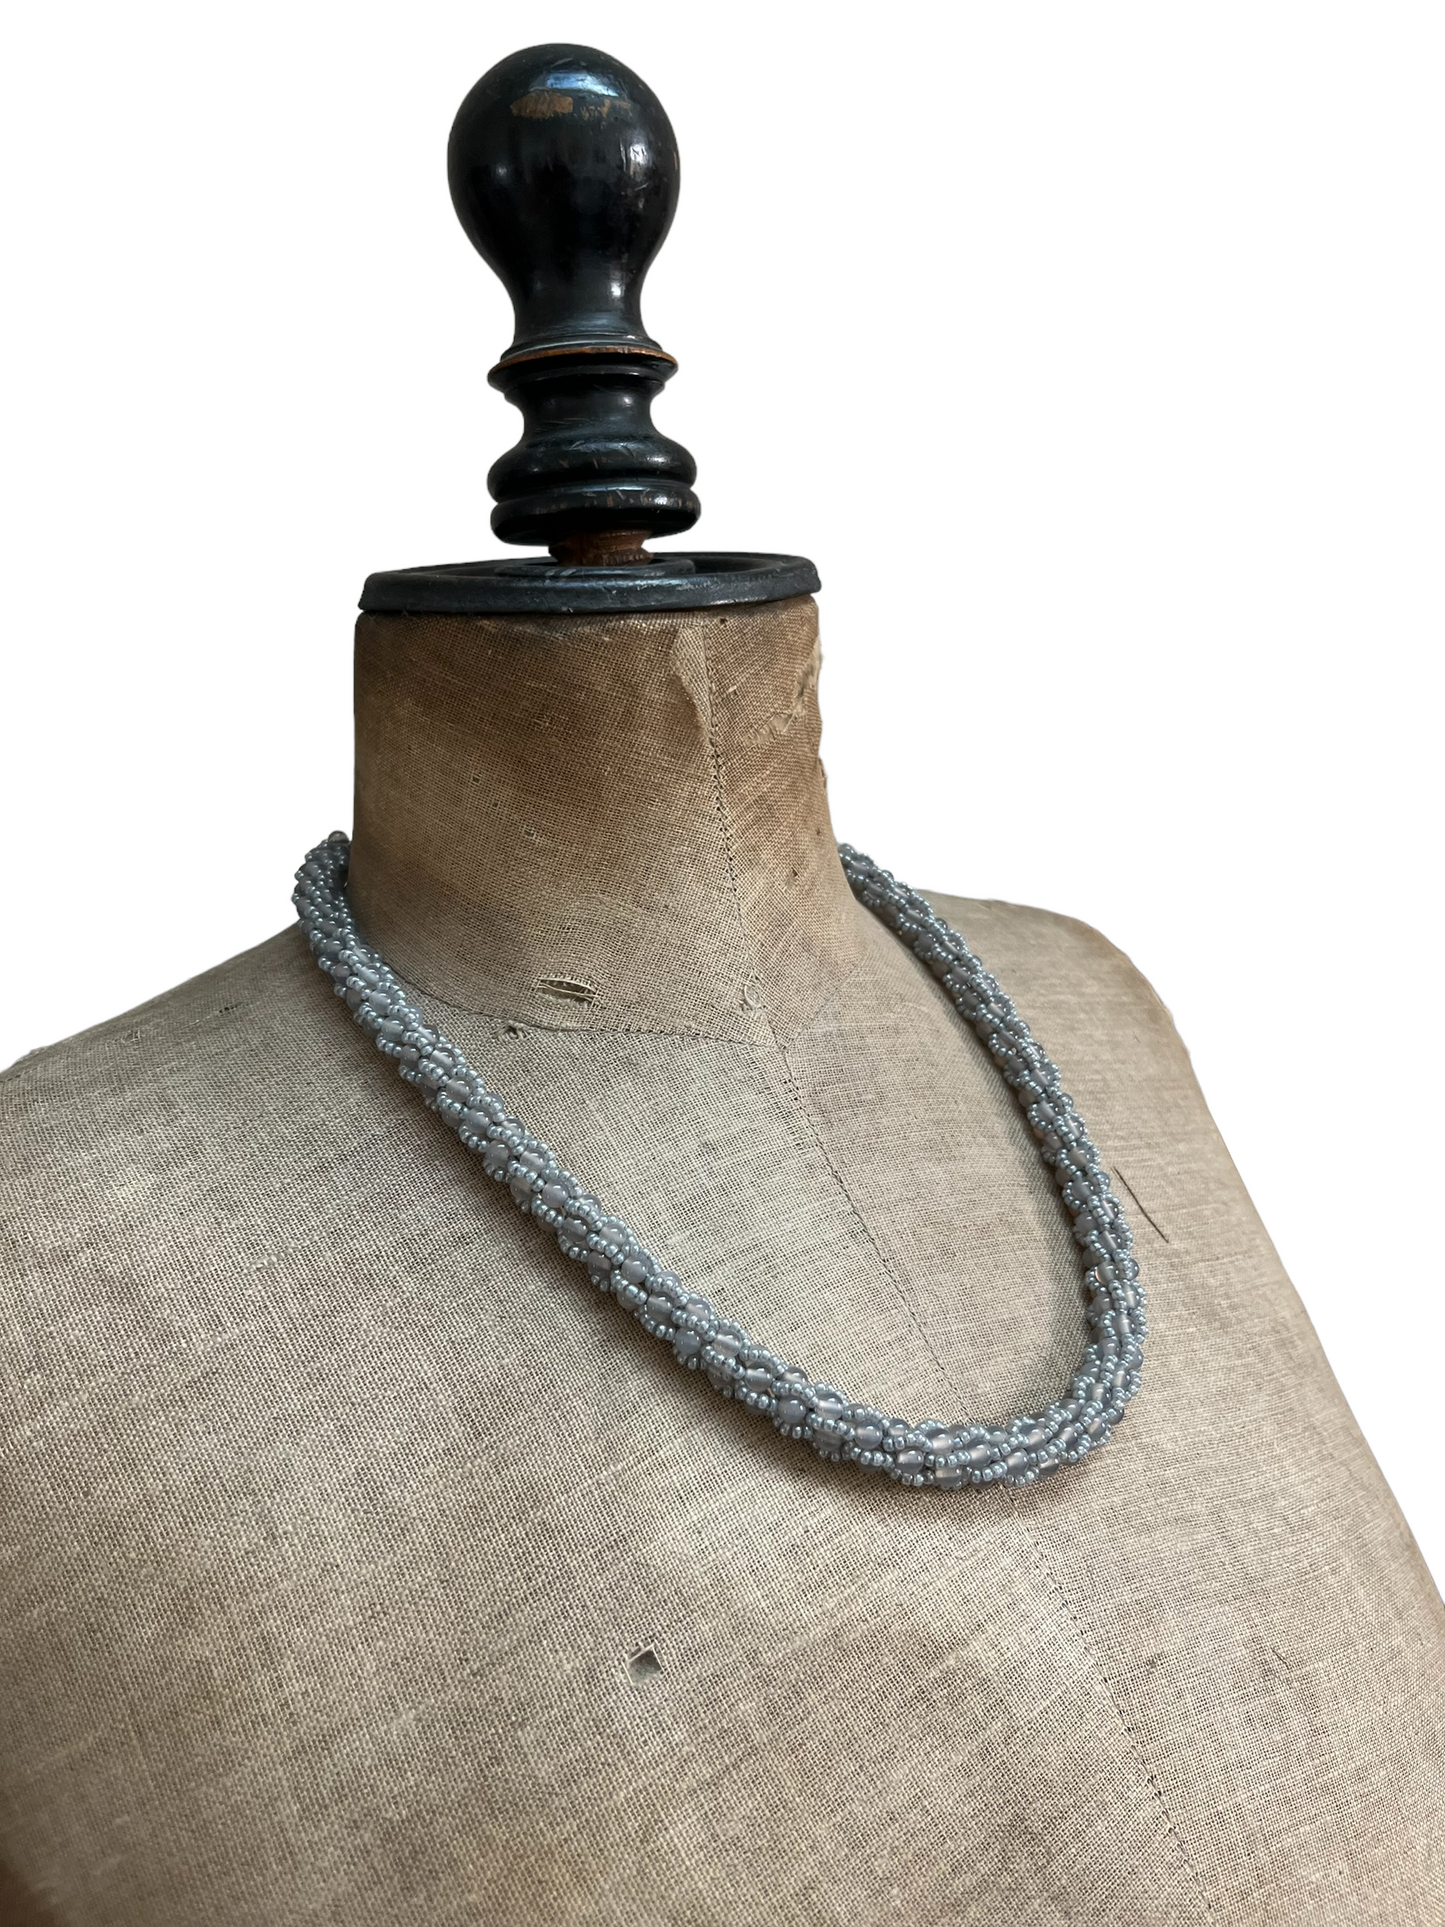 Crochet necklace in agate and Miyuki beads, 51 cm